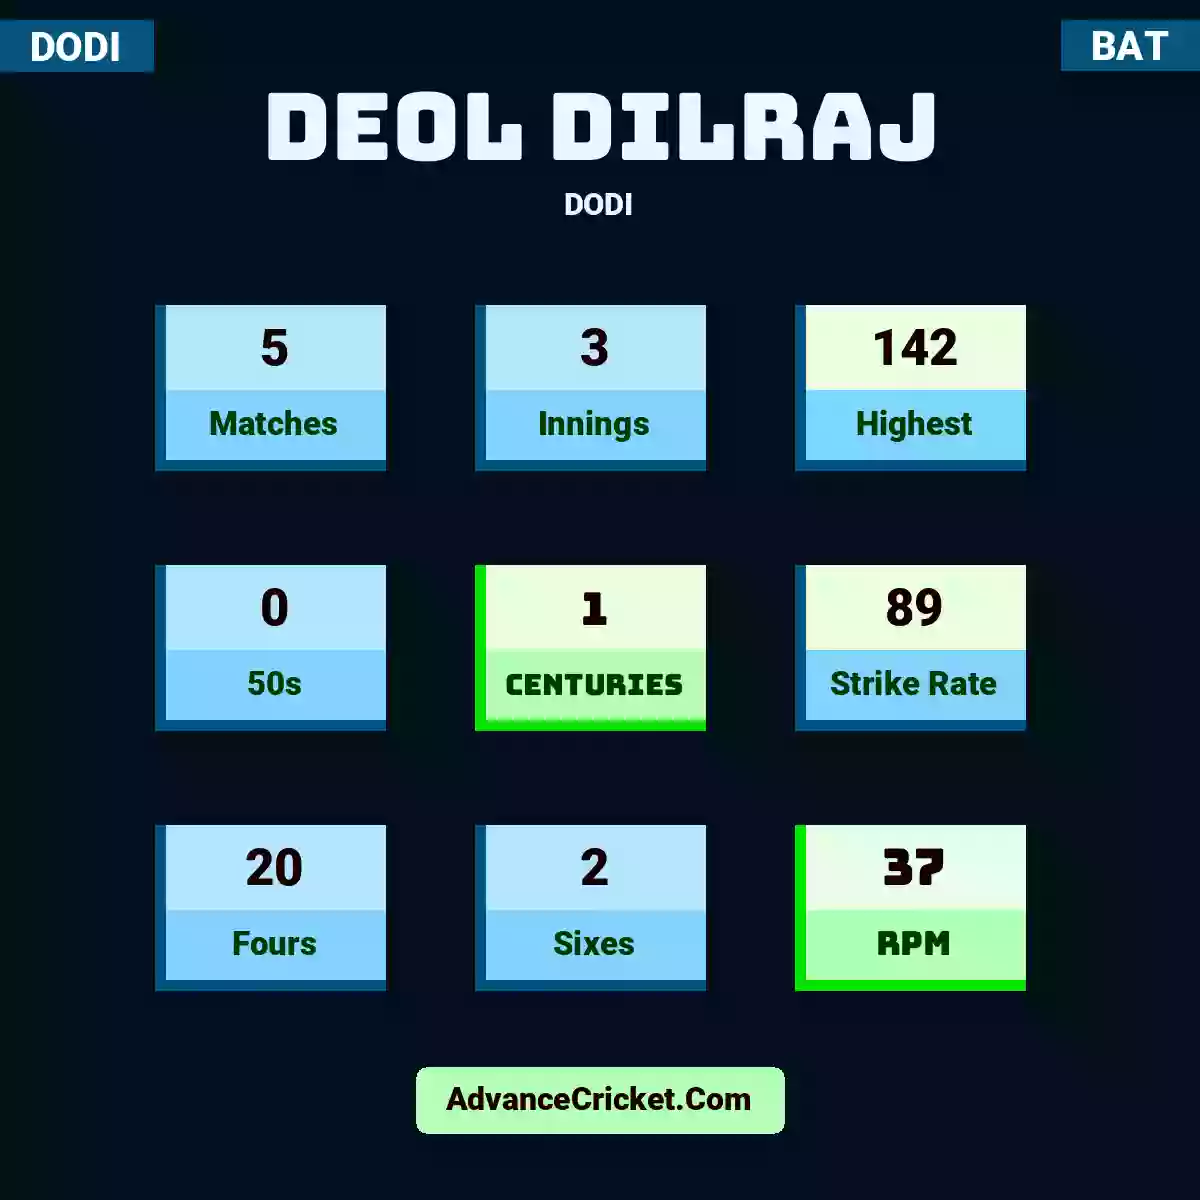 Deol Dilraj DODI , Deol Dilraj played 5 matches, scored 142 runs as highest, 0 half-centuries, and 1 centuries, with a strike rate of 89. D.Dilraj hit 20 fours and 2 sixes, with an RPM of 37.